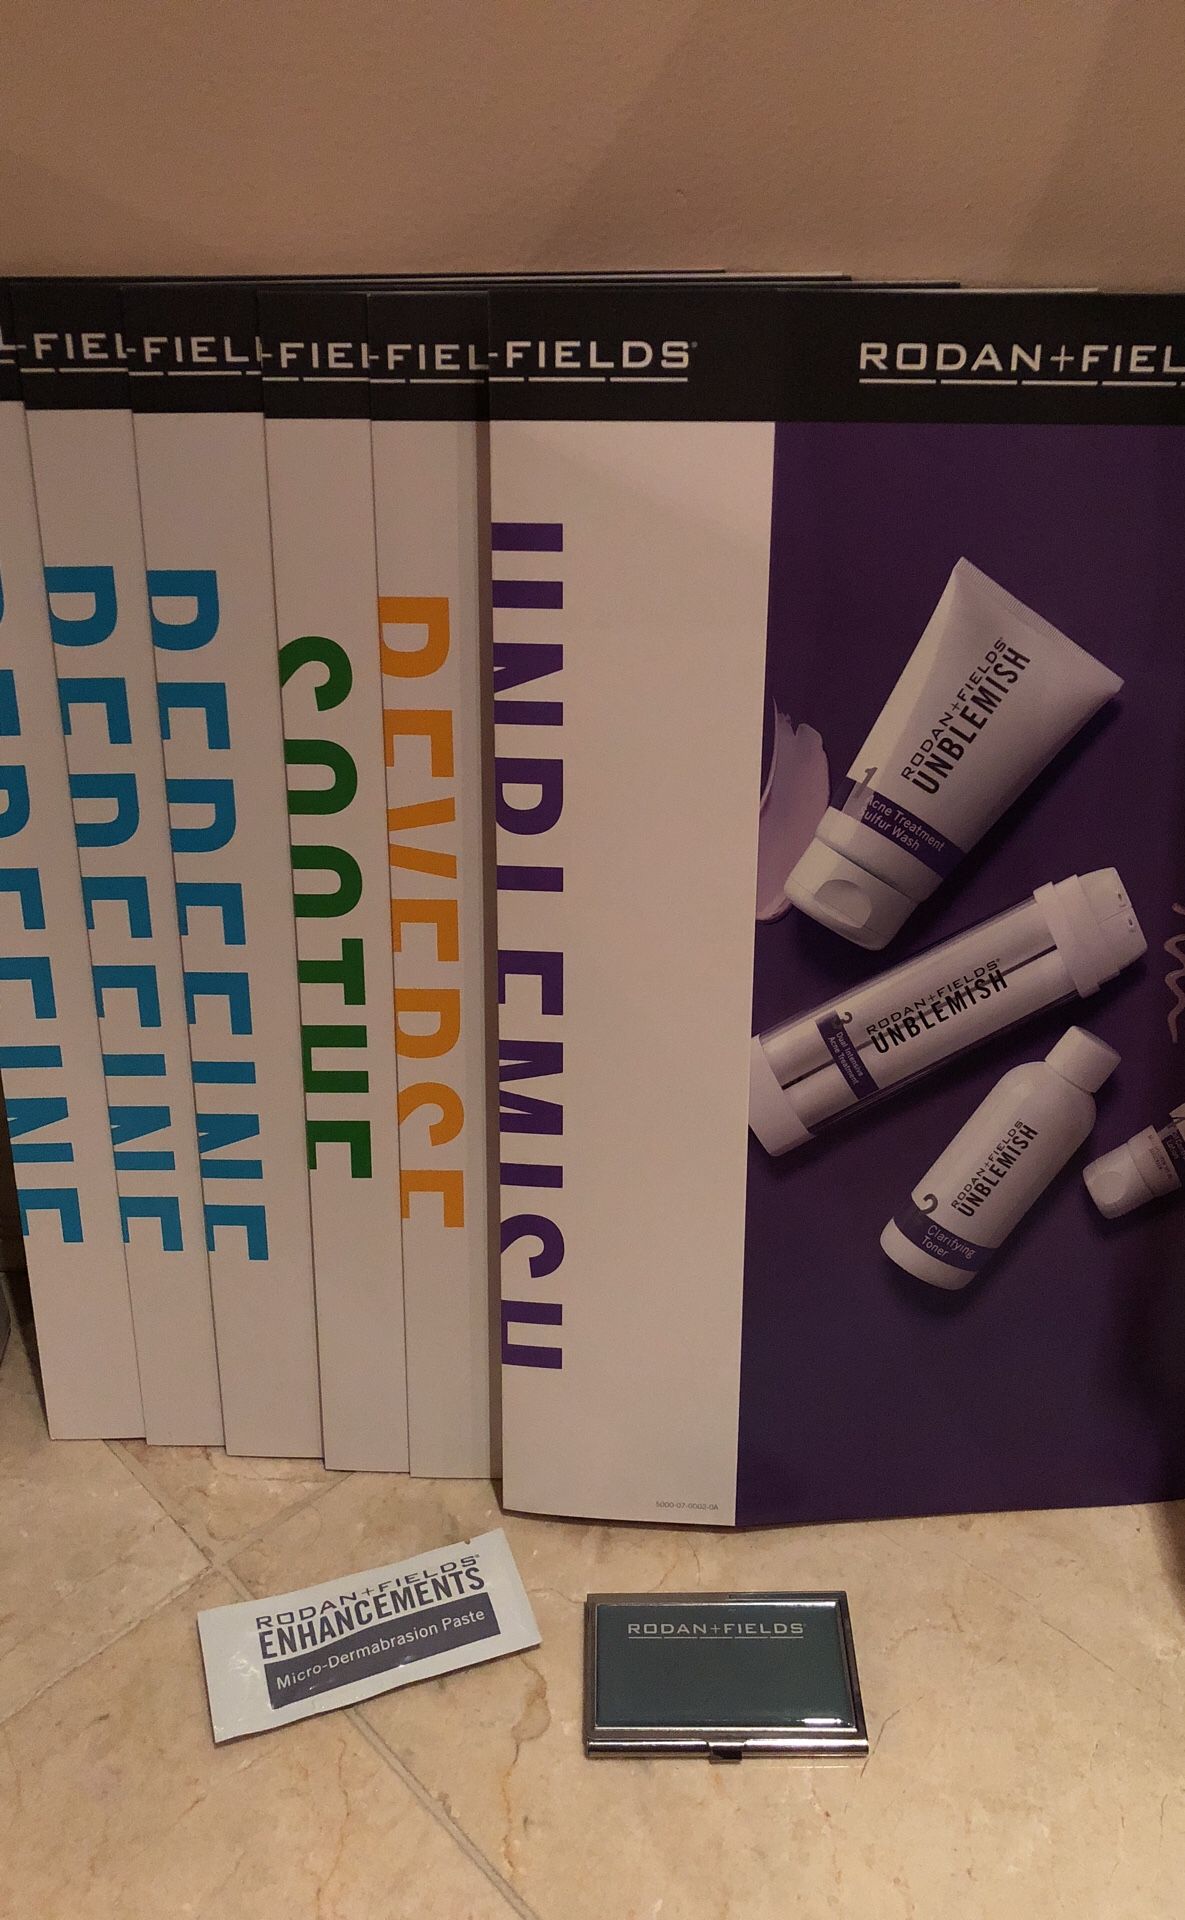 Rodan +Fields Promotional Posters, Sample Microdermabrasion, Business Cards Holder exclusive to R+F